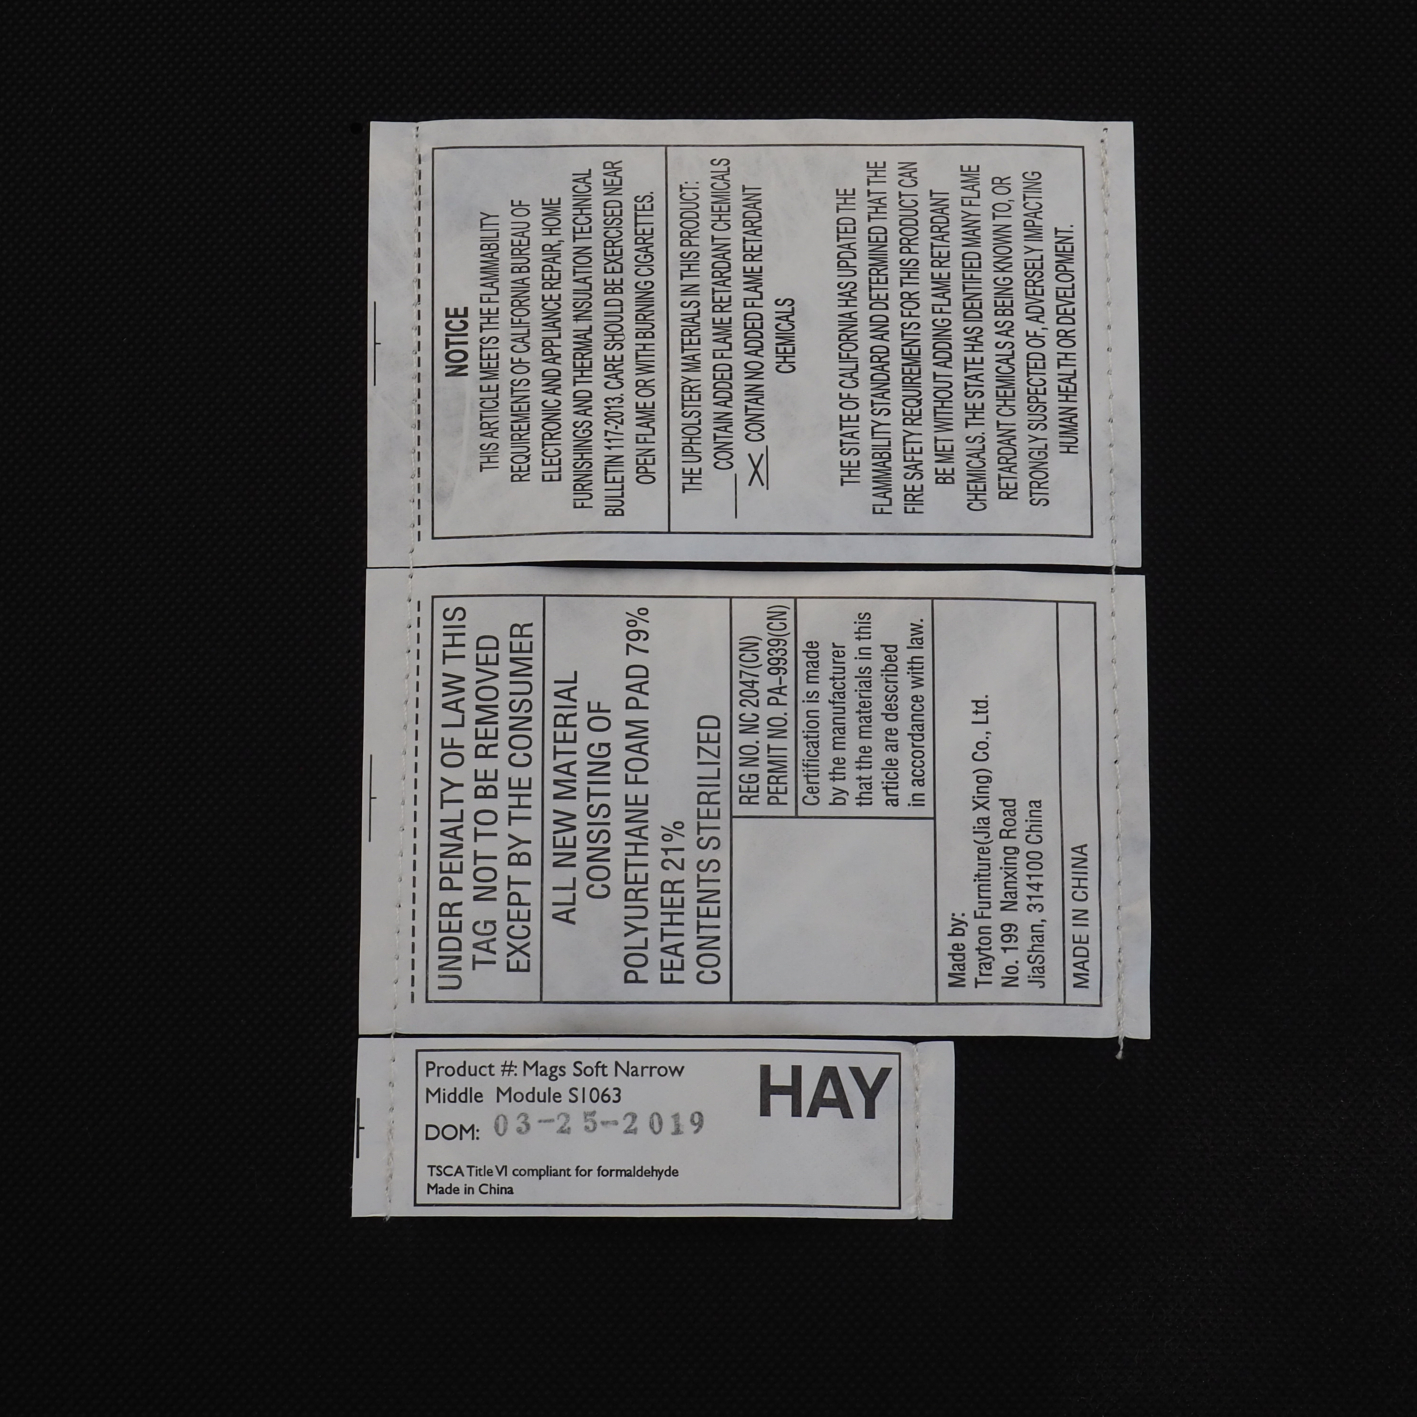 Sofa module 'Mags Soft 1063 Narrow Middle' by HAY